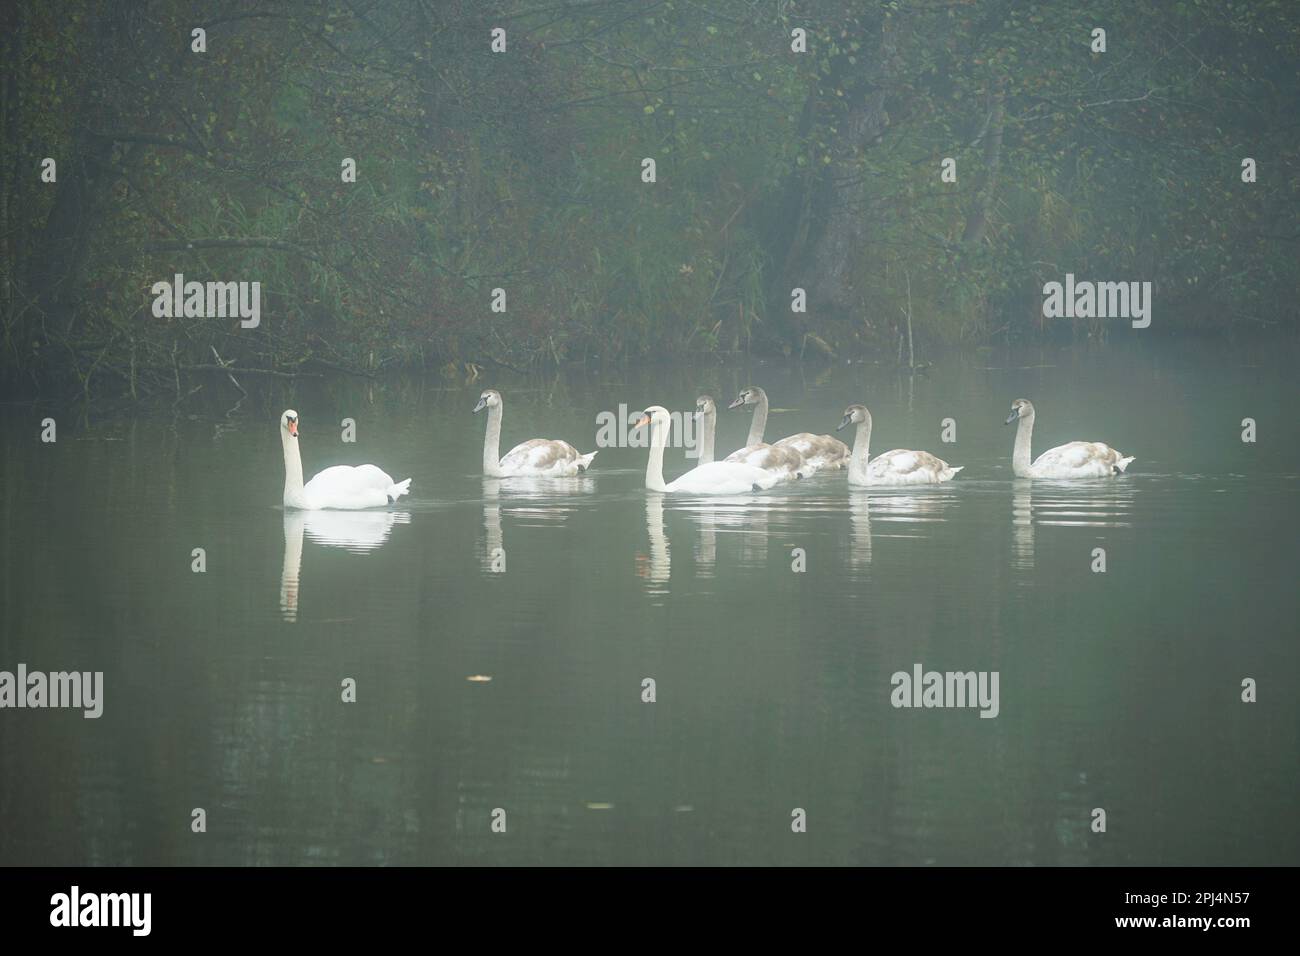 foggy day autumn swans on the river Vils, beautiful animal animals on the water with fog, schöner Herbsttag mit viel Nebel. Stock Photo